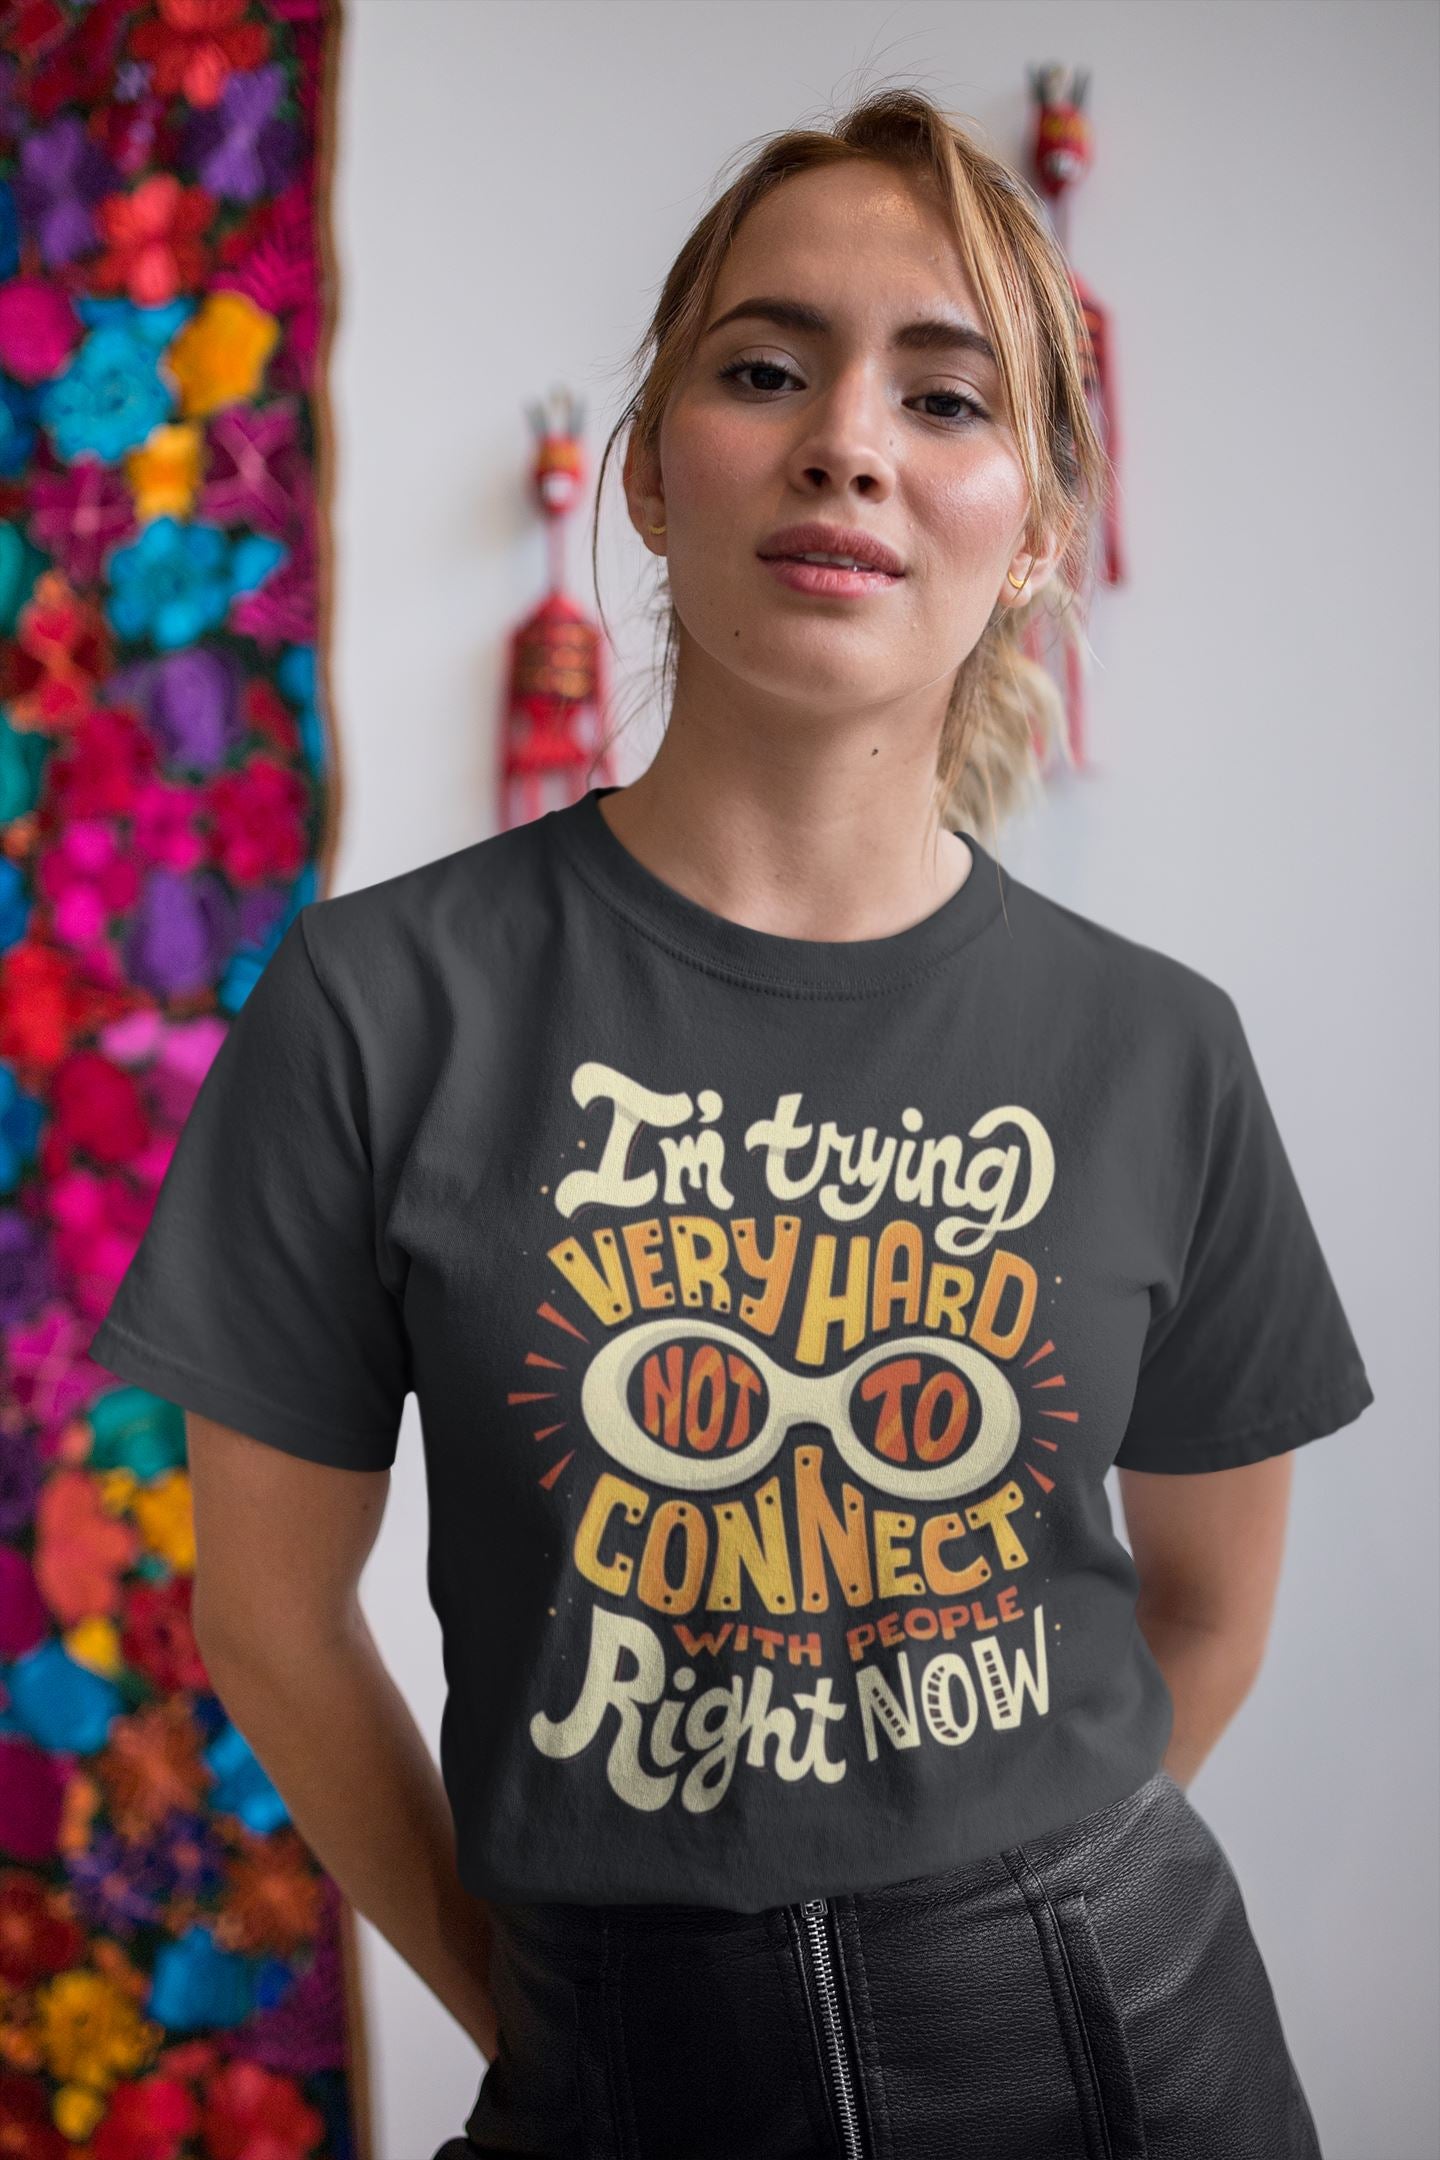 I Am Trying Very Hard Not To Connect to People Official Funny Schitt's Creek T Shirt for Men and Women freeshipping - Catch My Drift India